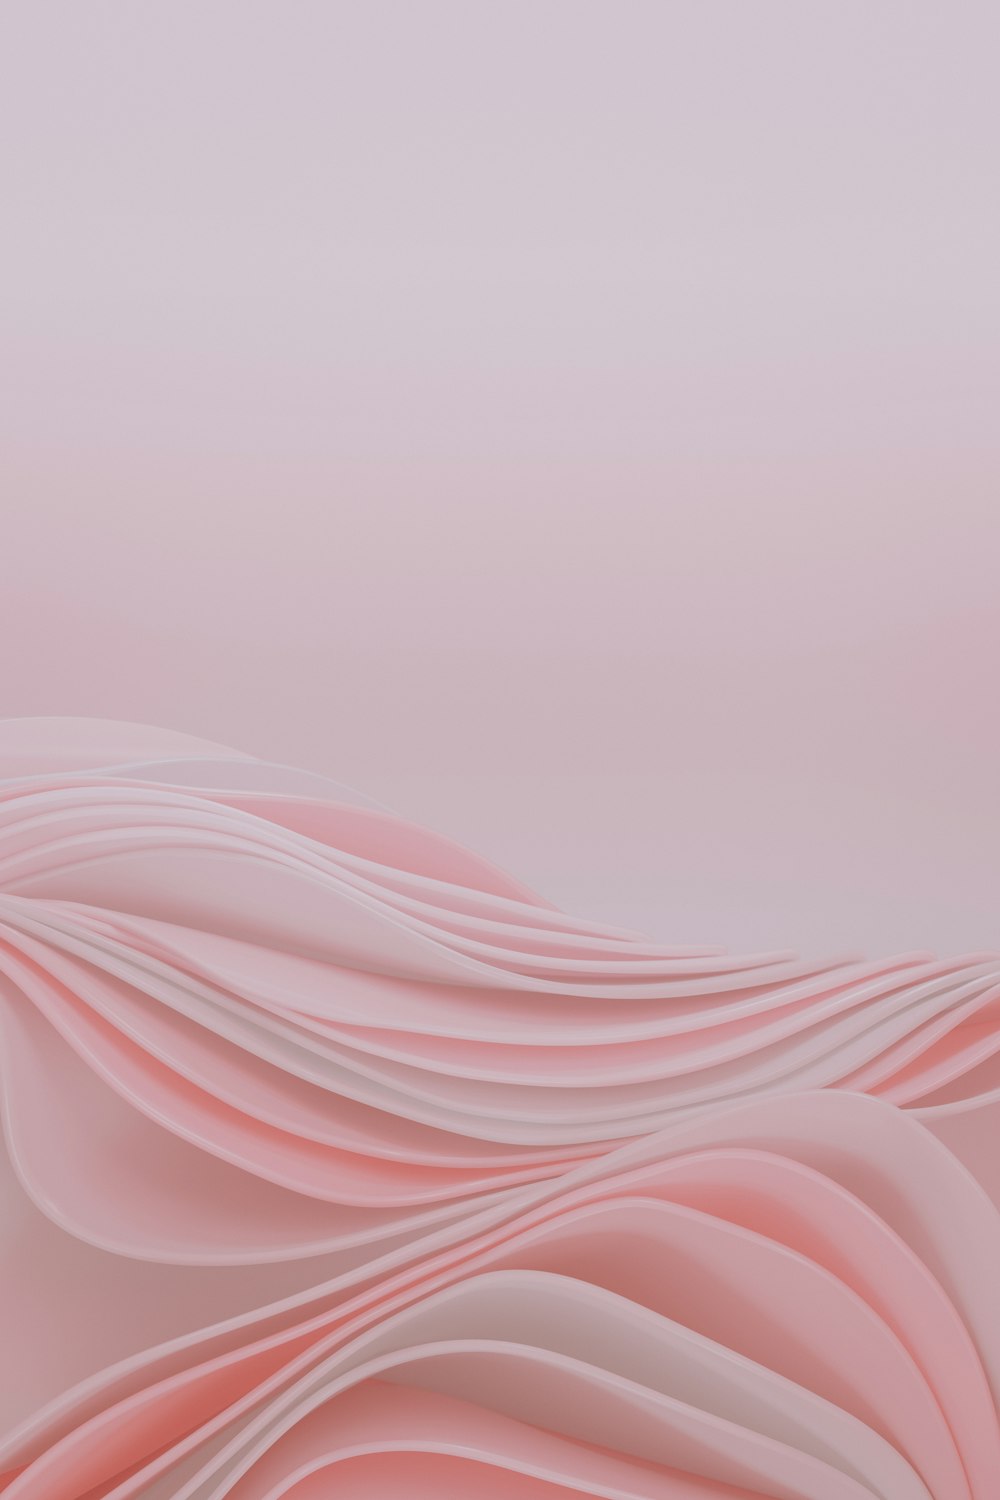 an abstract pink background with wavy lines